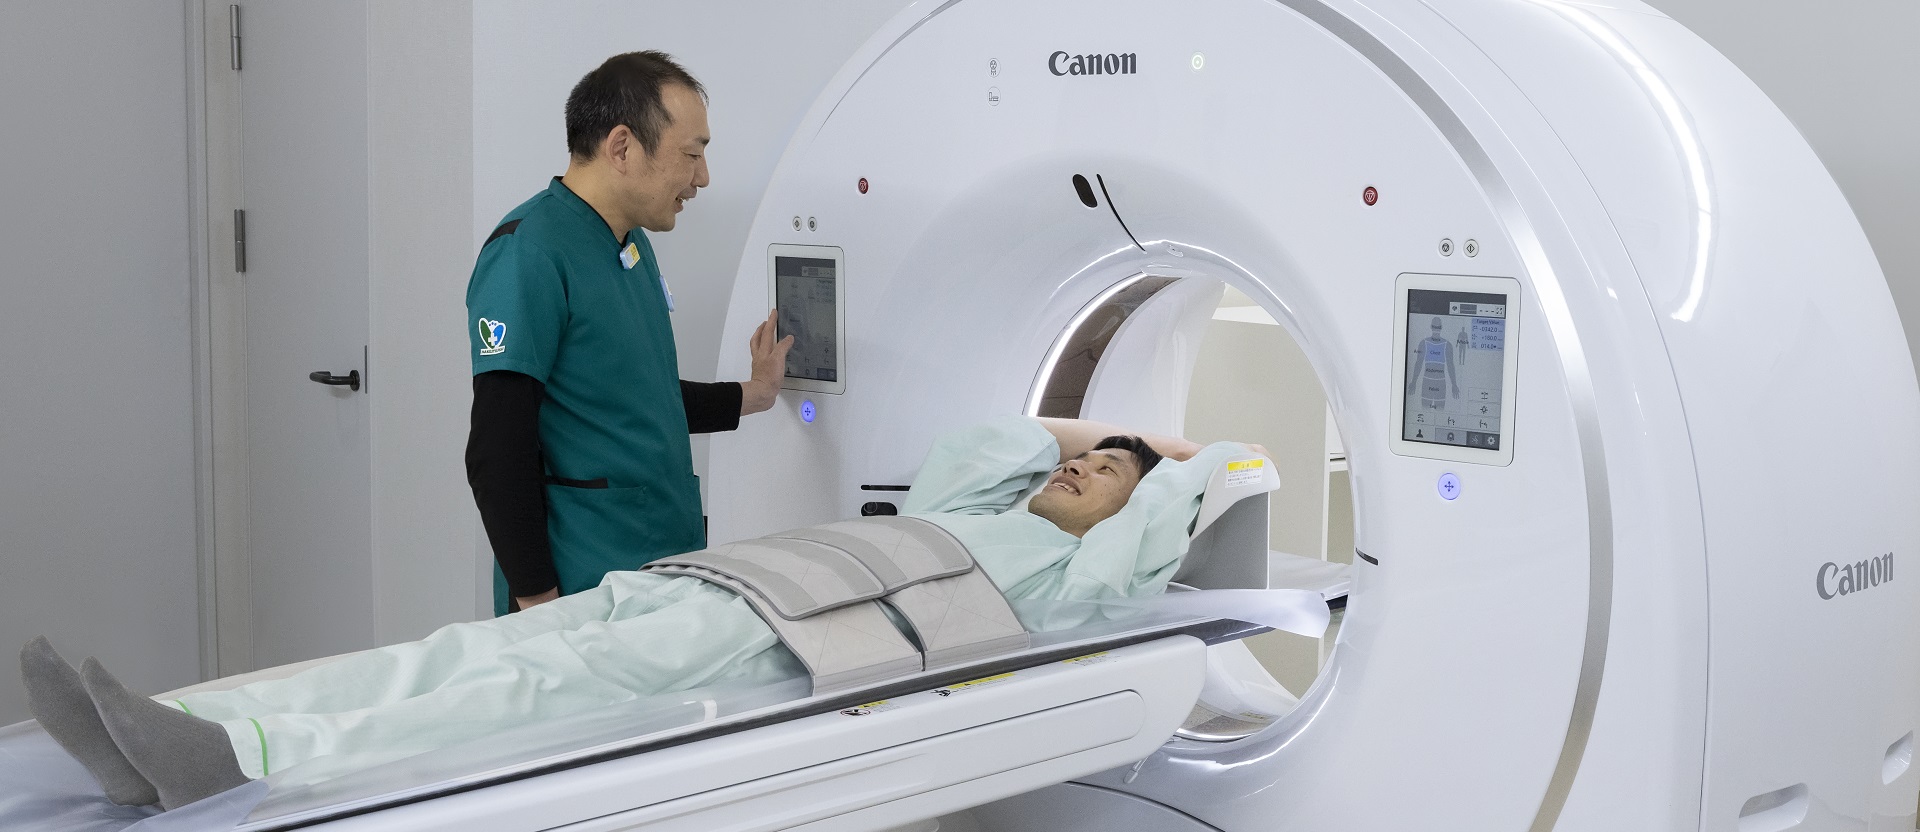 X-ray CT System That Supports Emergency Medical Care